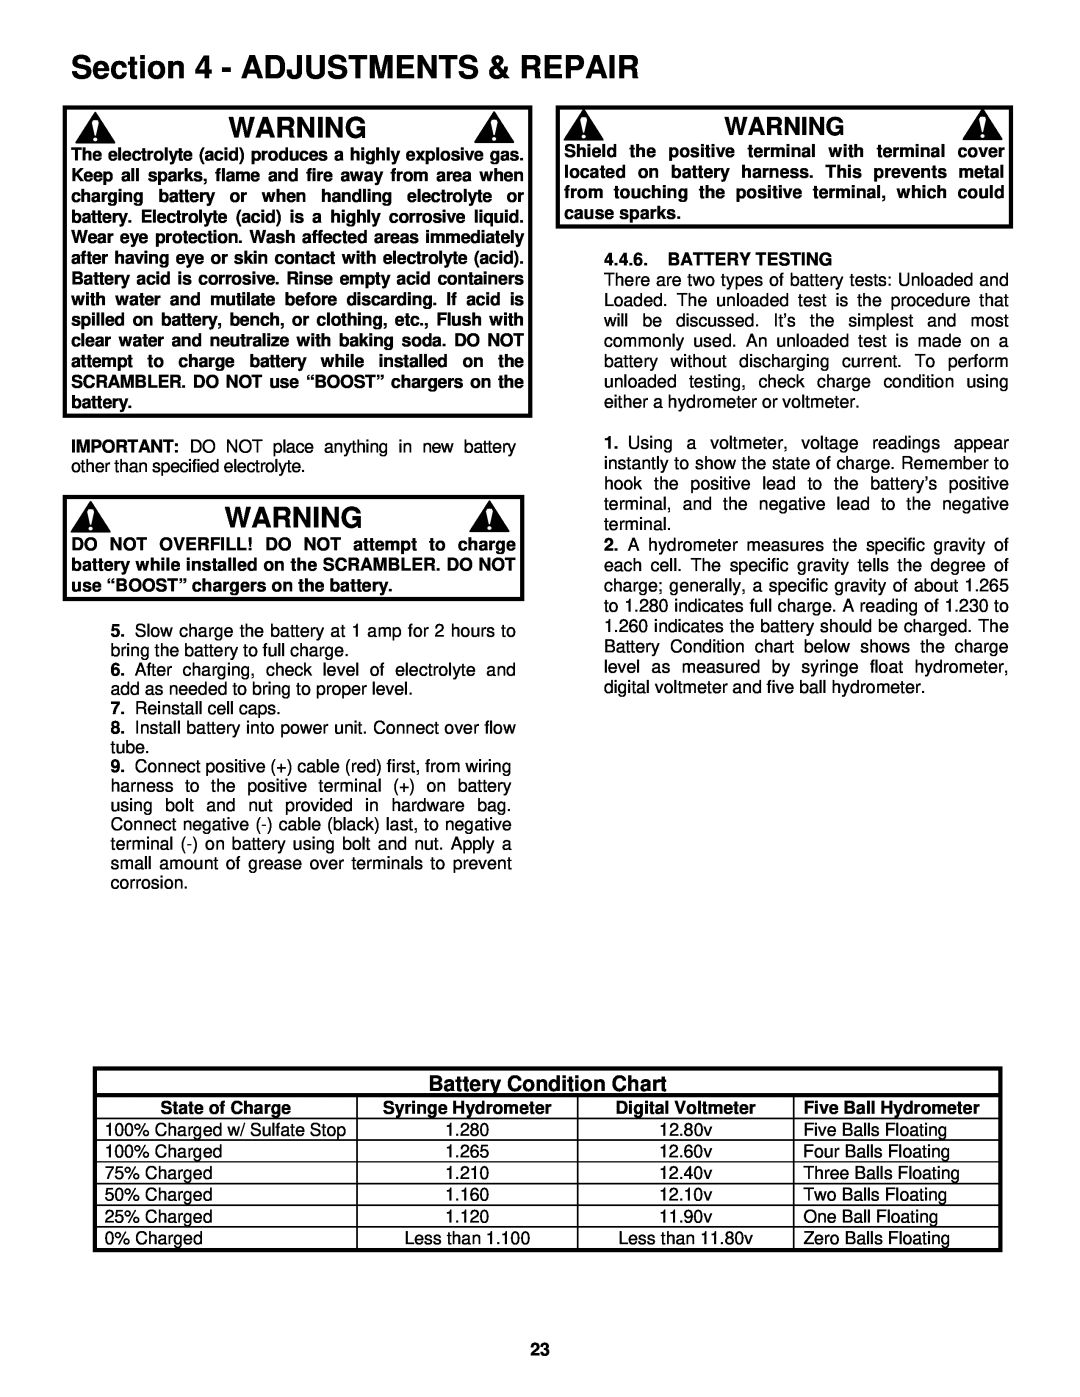 Snapper YZ18426BVE, YZ20486BVE important safety instructions Adjustments & Repair, Battery Condition Chart 